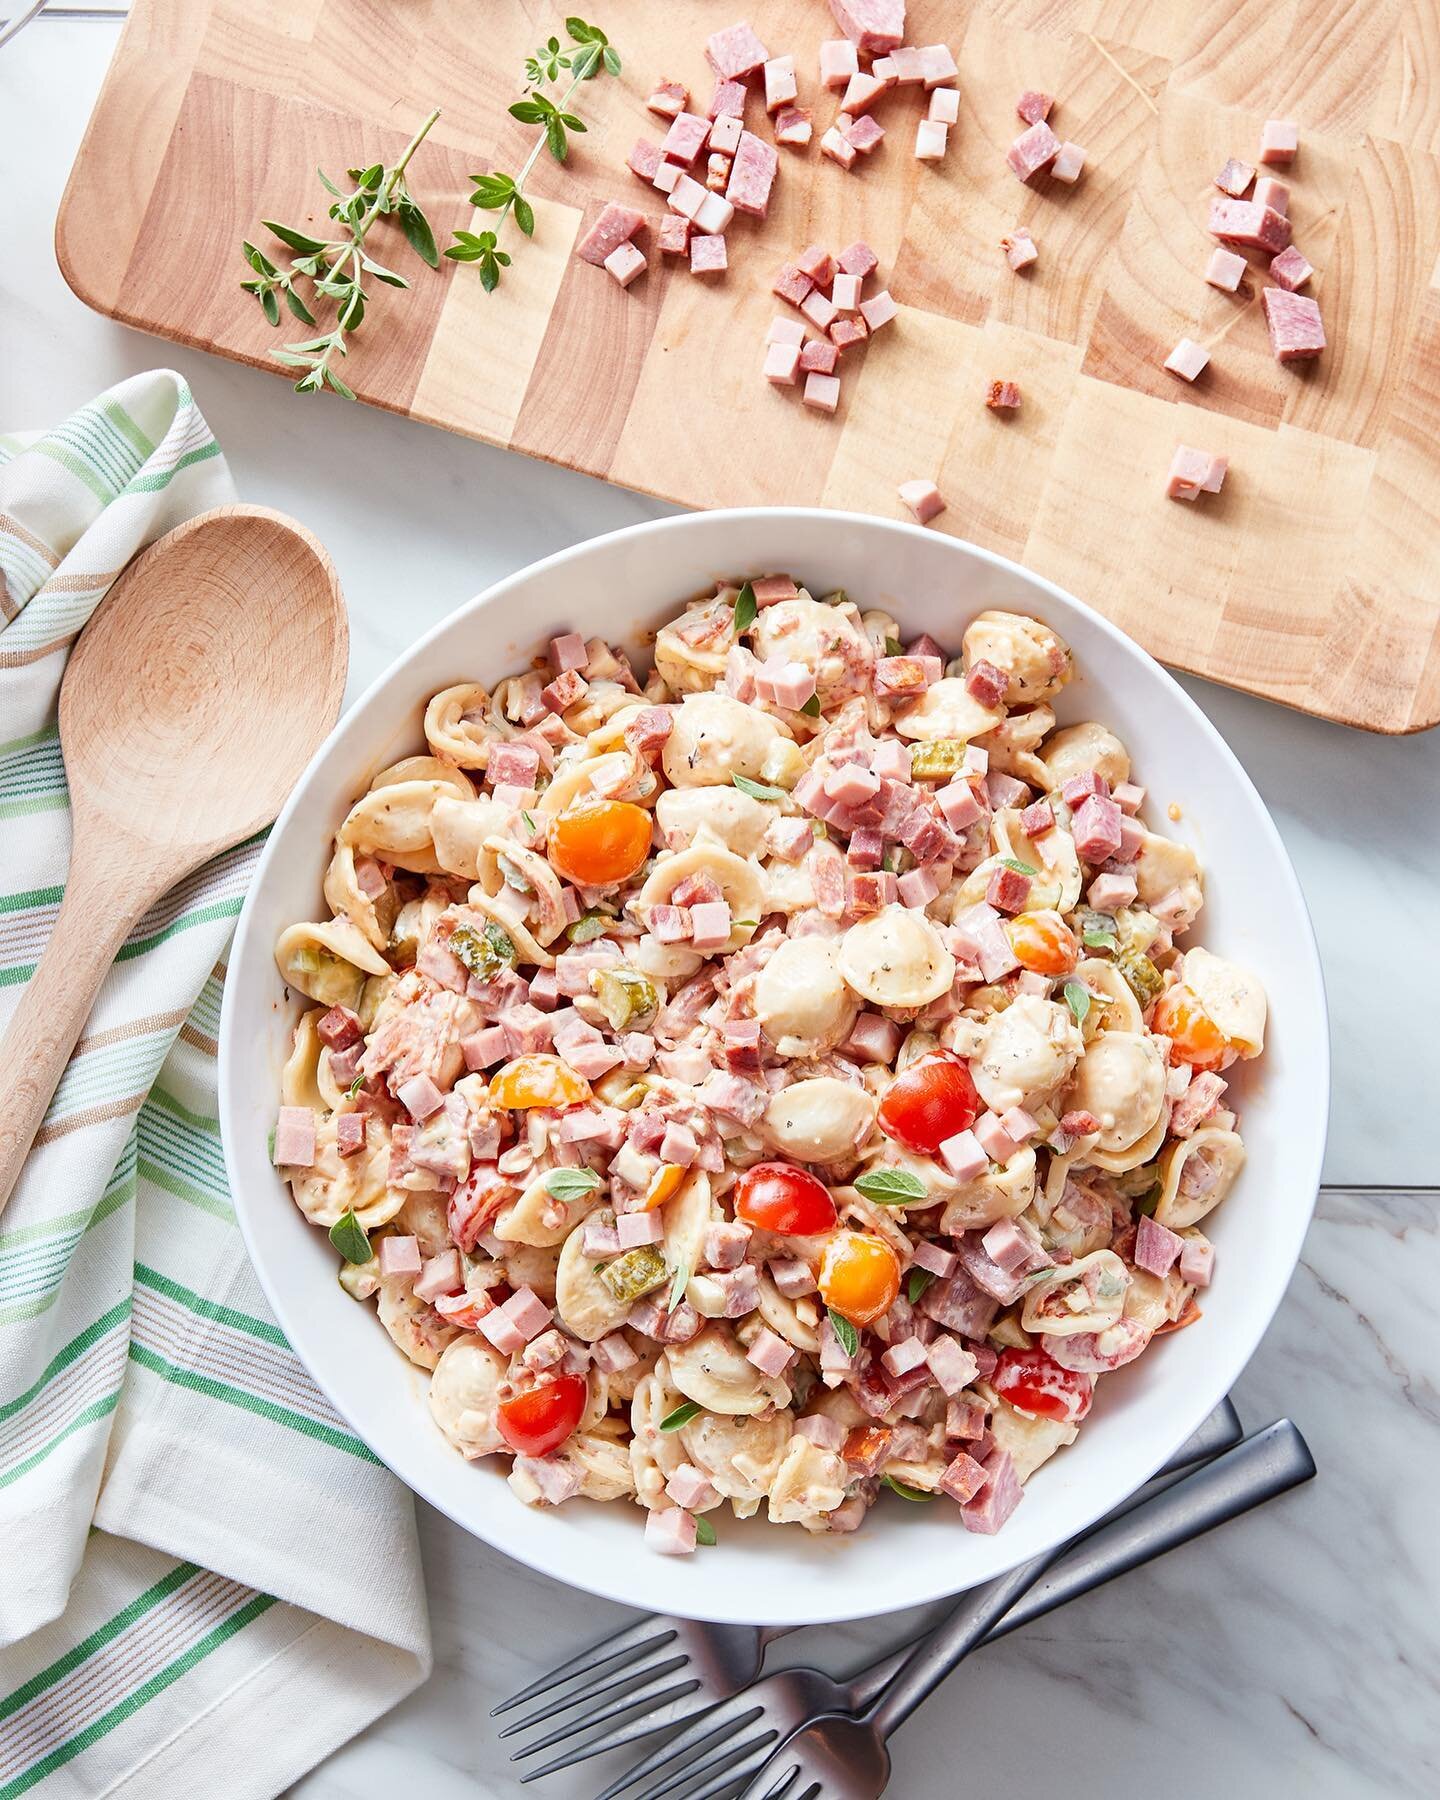 Italian Hoagie Pasta Salad

for @carandomeats&nbsp;
creative direction by @elevationadvertising
Recipe by @comfortjasonrva&nbsp;
styling by me 👋 
photography by @grahamcopeland from @_neonghost

Italian Hoagie Pasta Salad:

1 lb. Orecchiette pasta
1